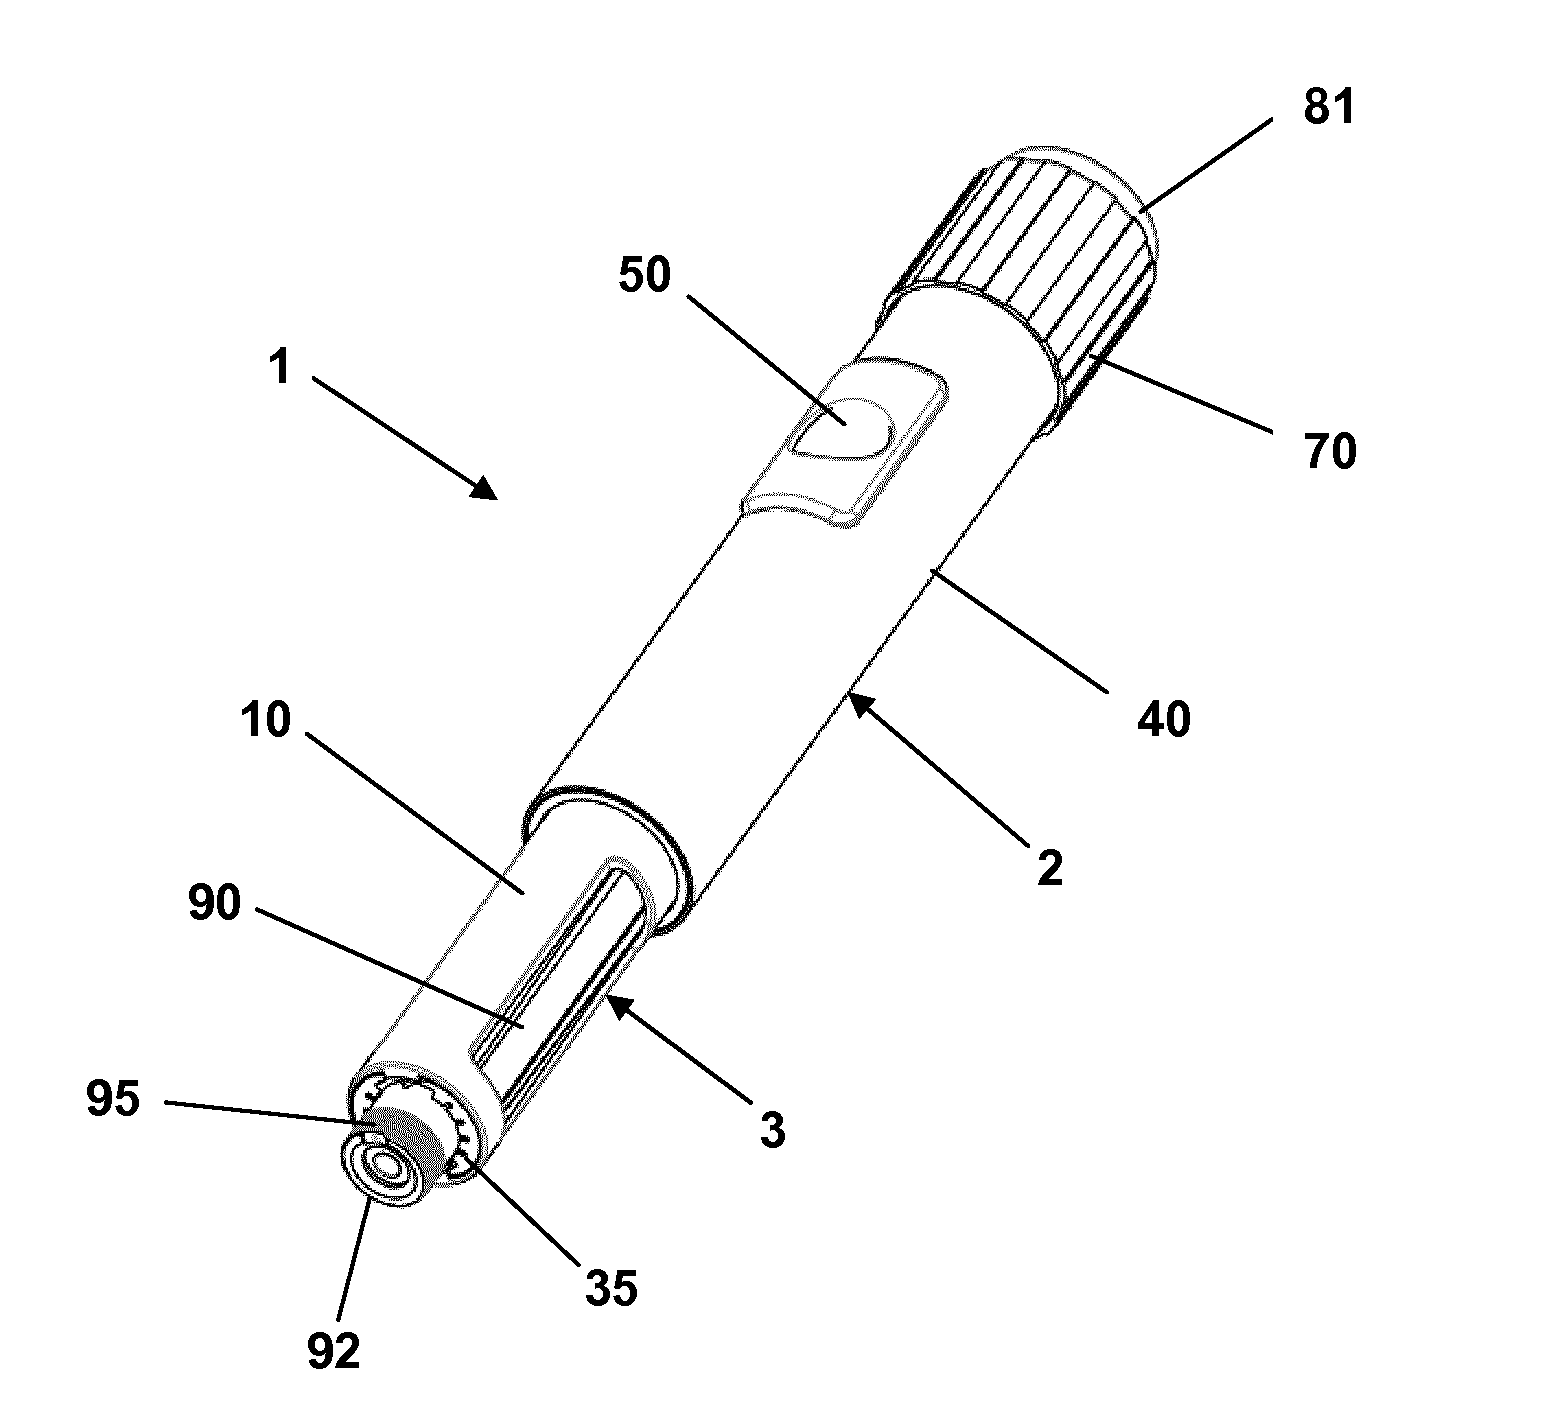 Drug Delivery Device with Front Loading Feature